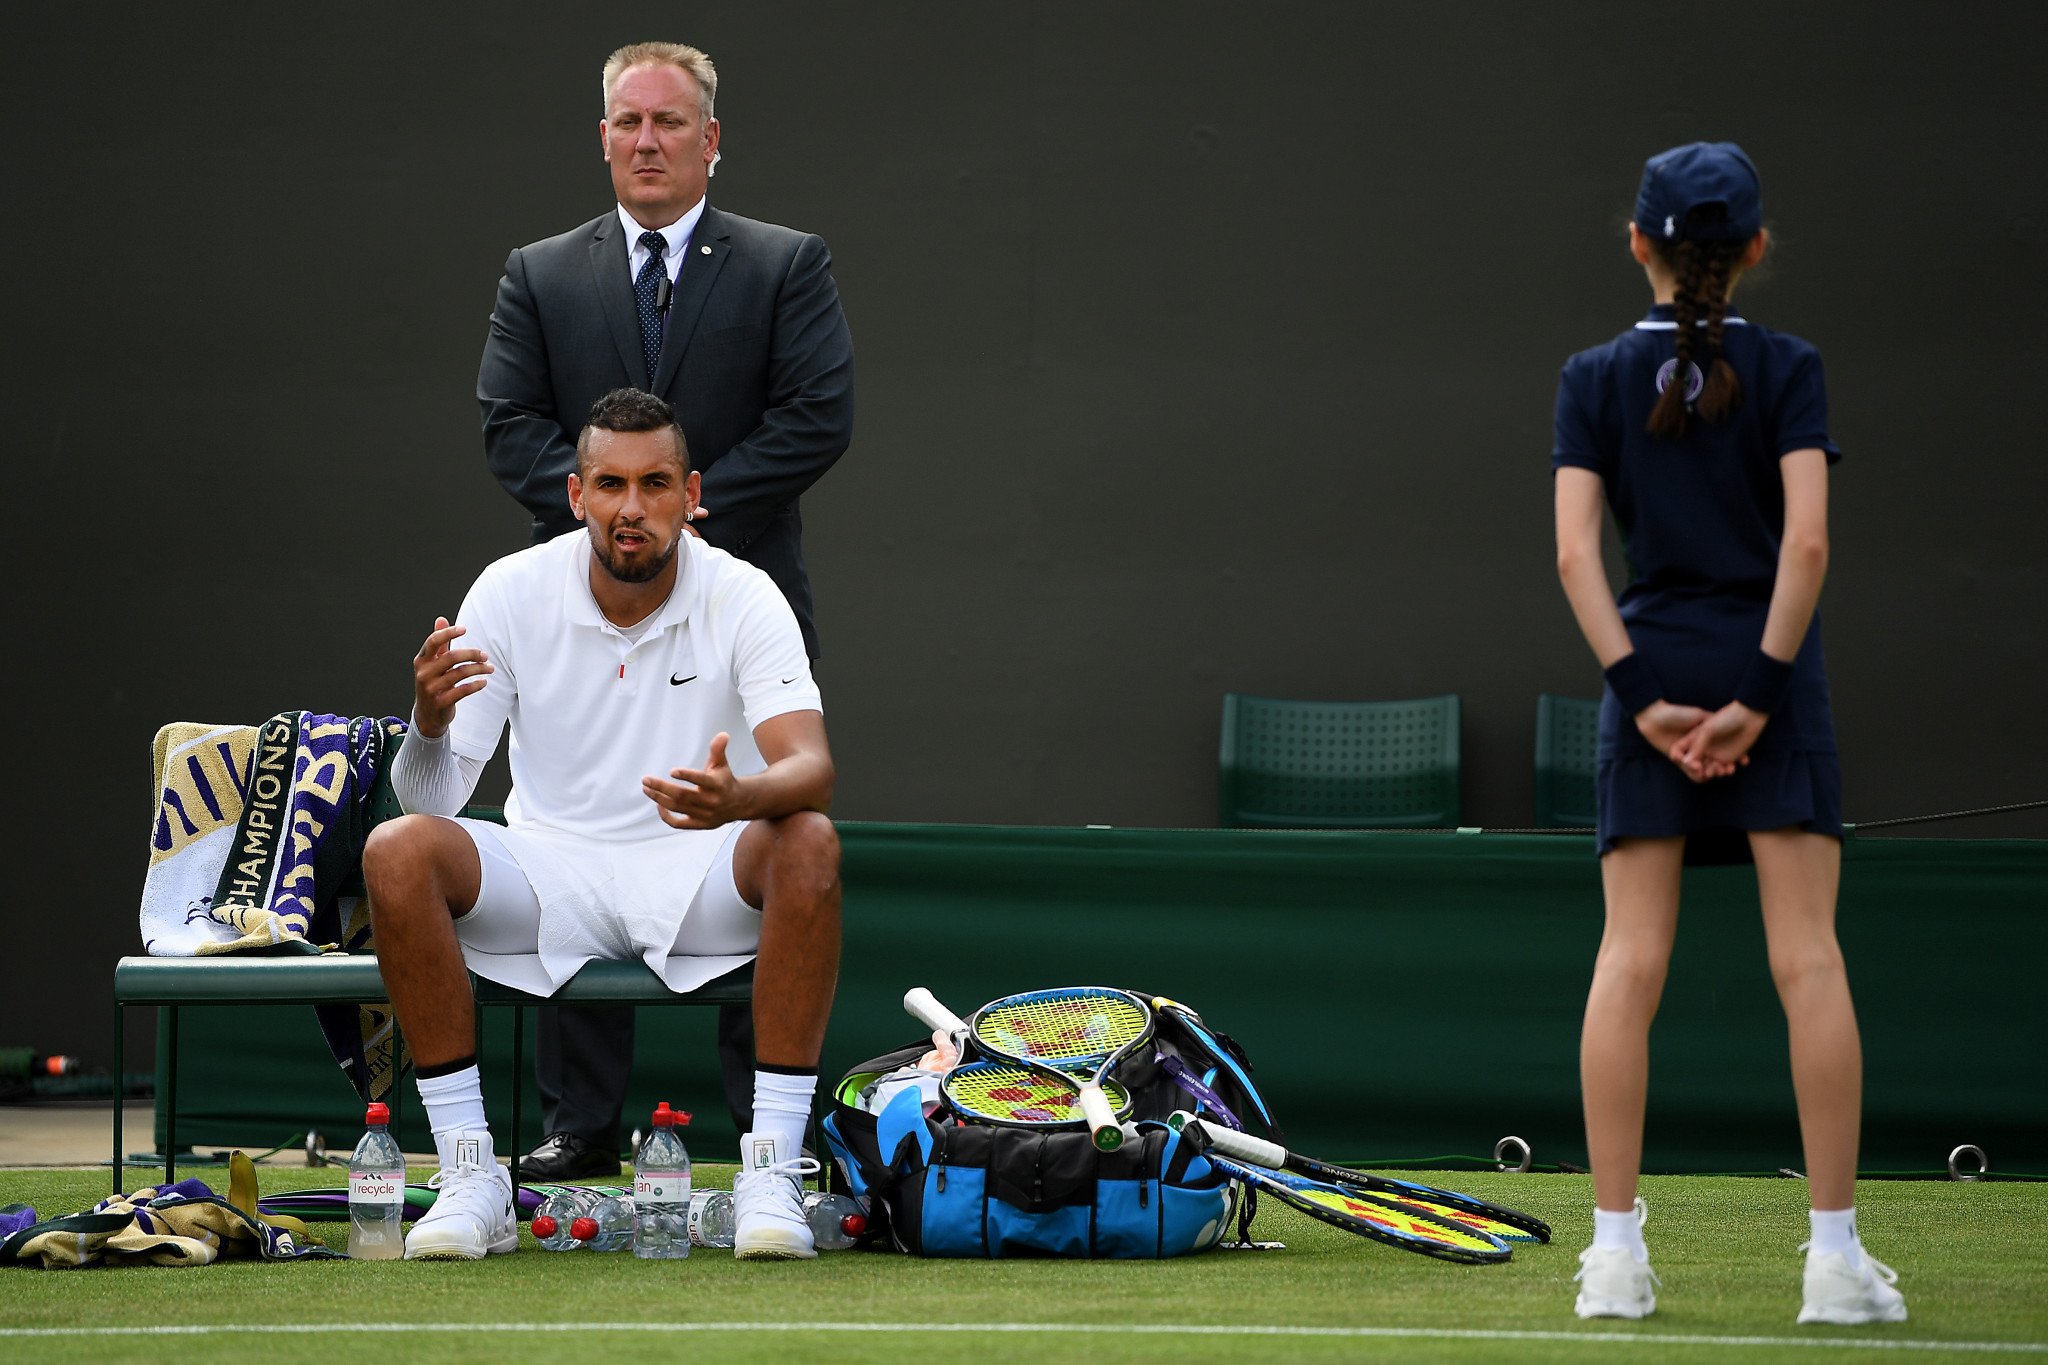 Awaiting the Spaniard in the second round is controversial Australian Nick Kyrgios, who he accused of lacking respect earlier this year after losing against him ©Getty Images